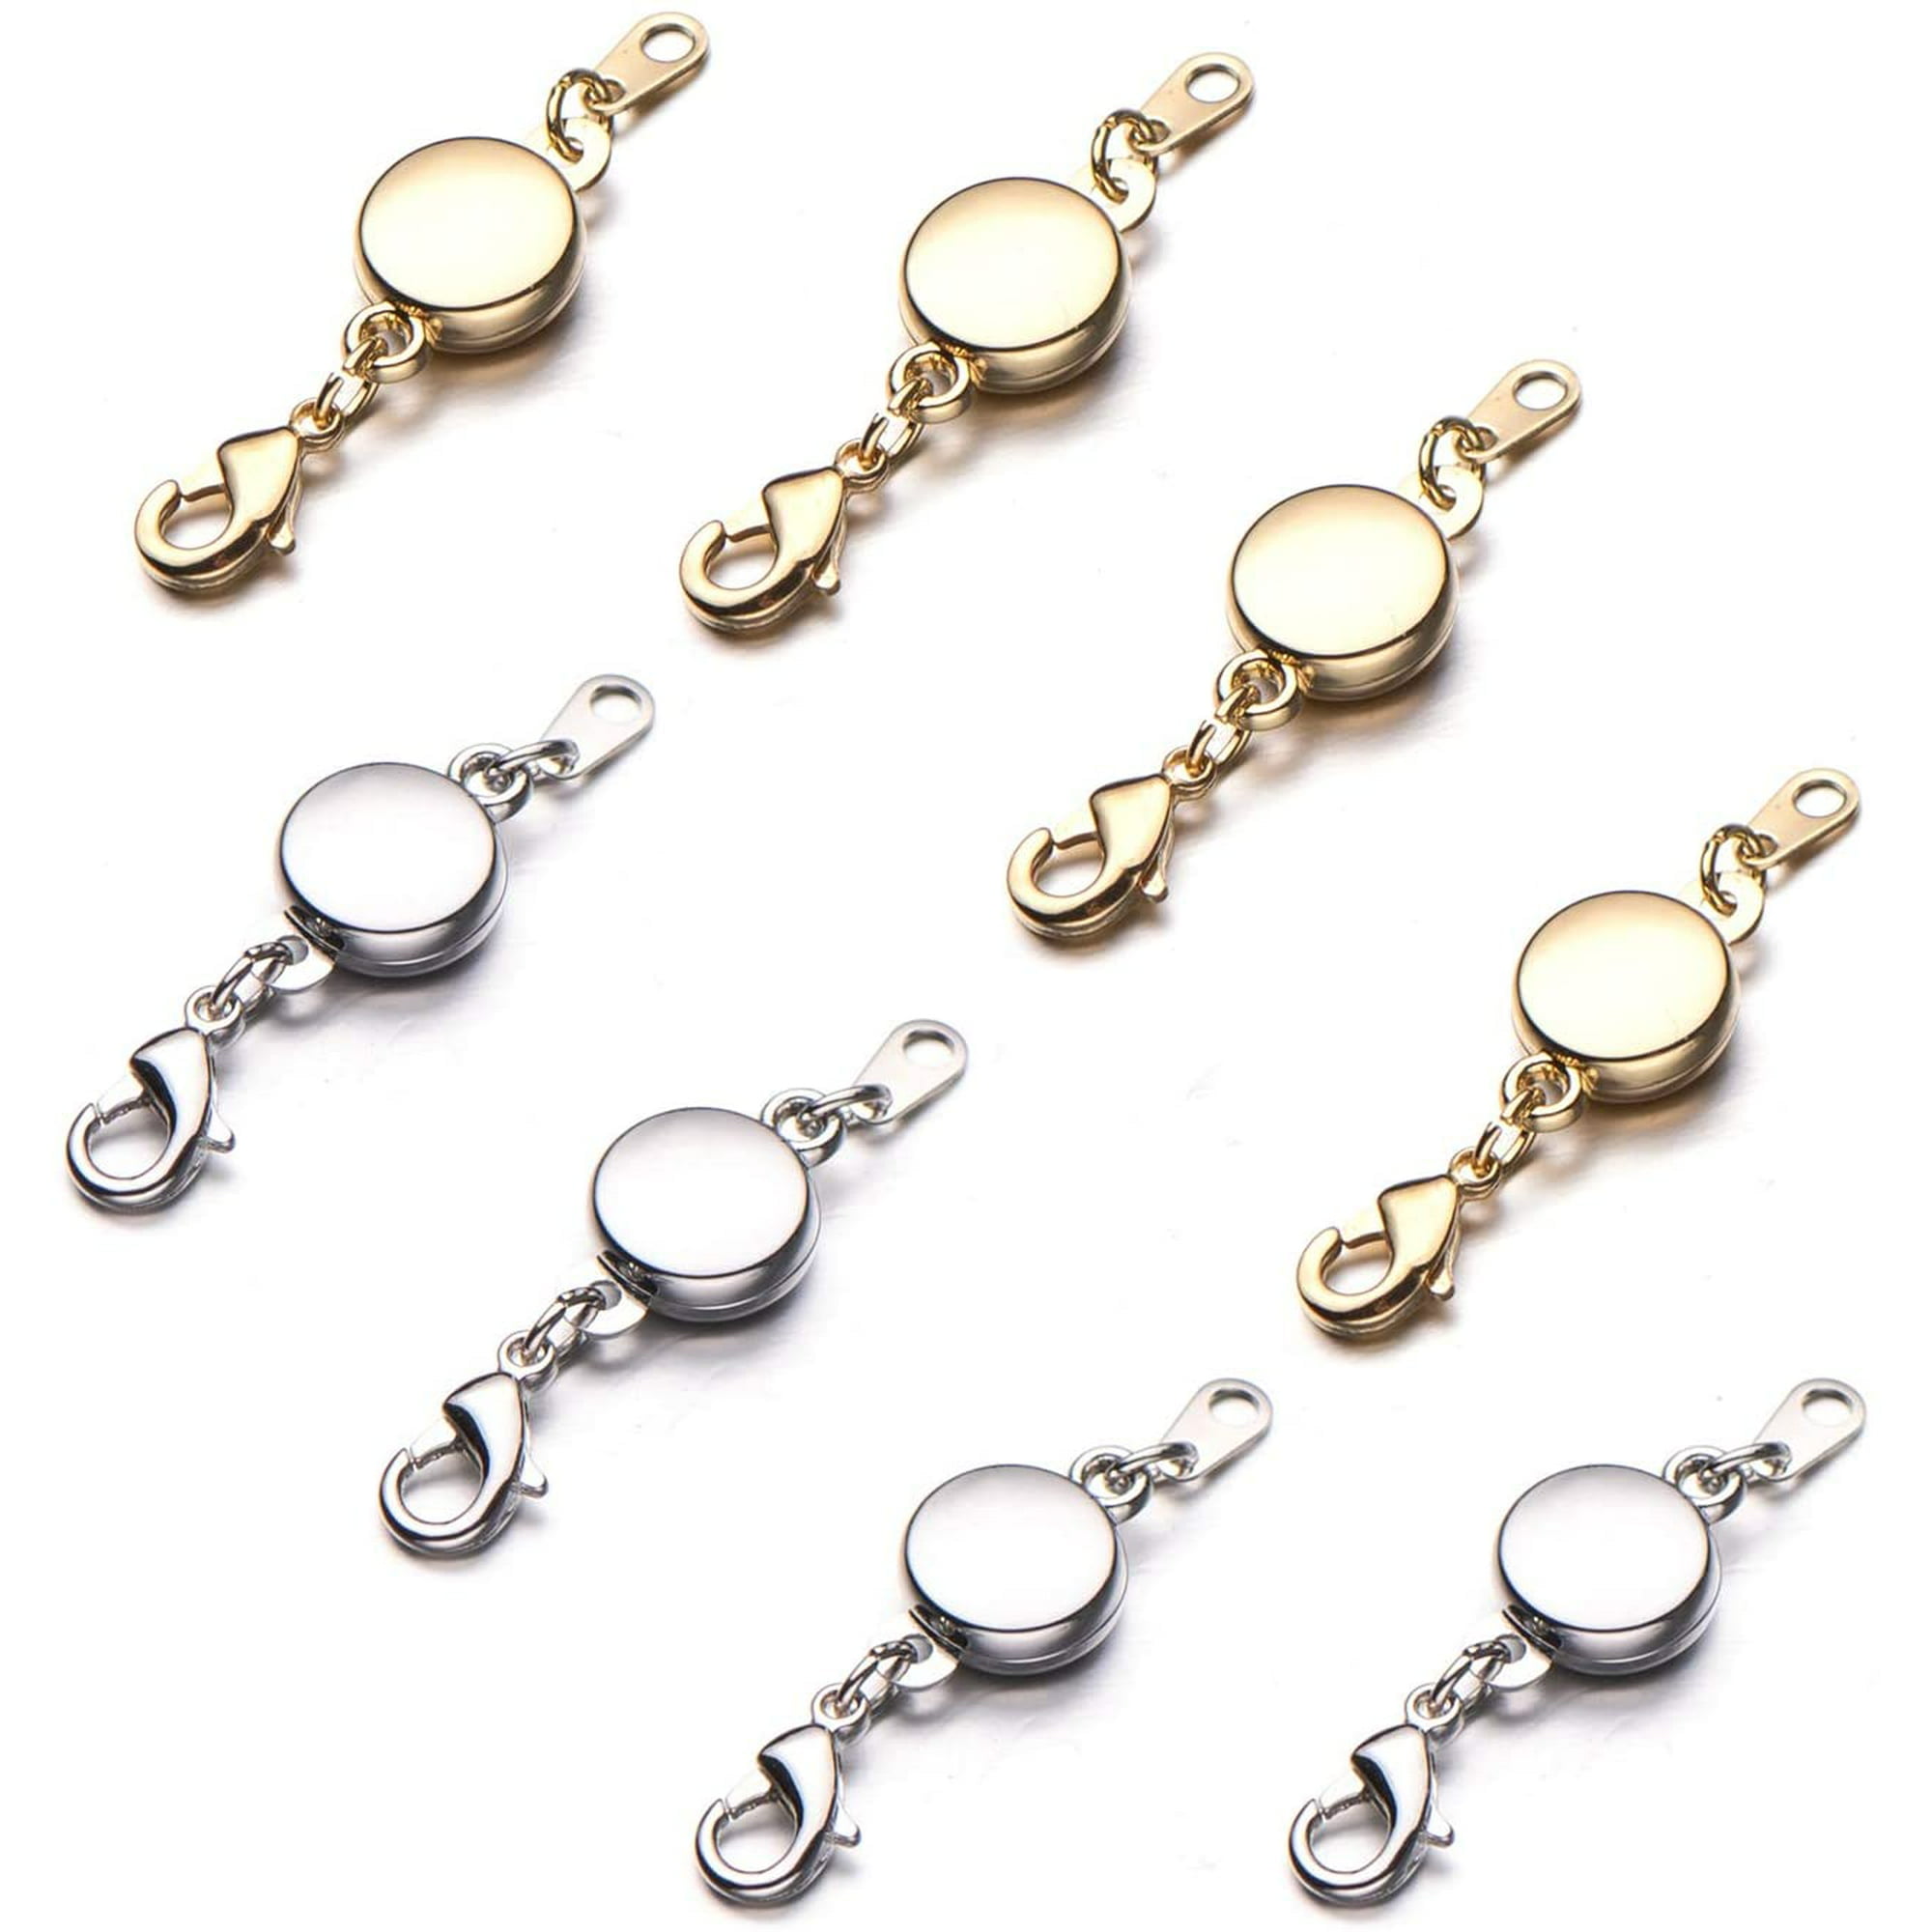 14x7mm Magnetic Necklace Clasp, Magnetic Clasp 14x7mm